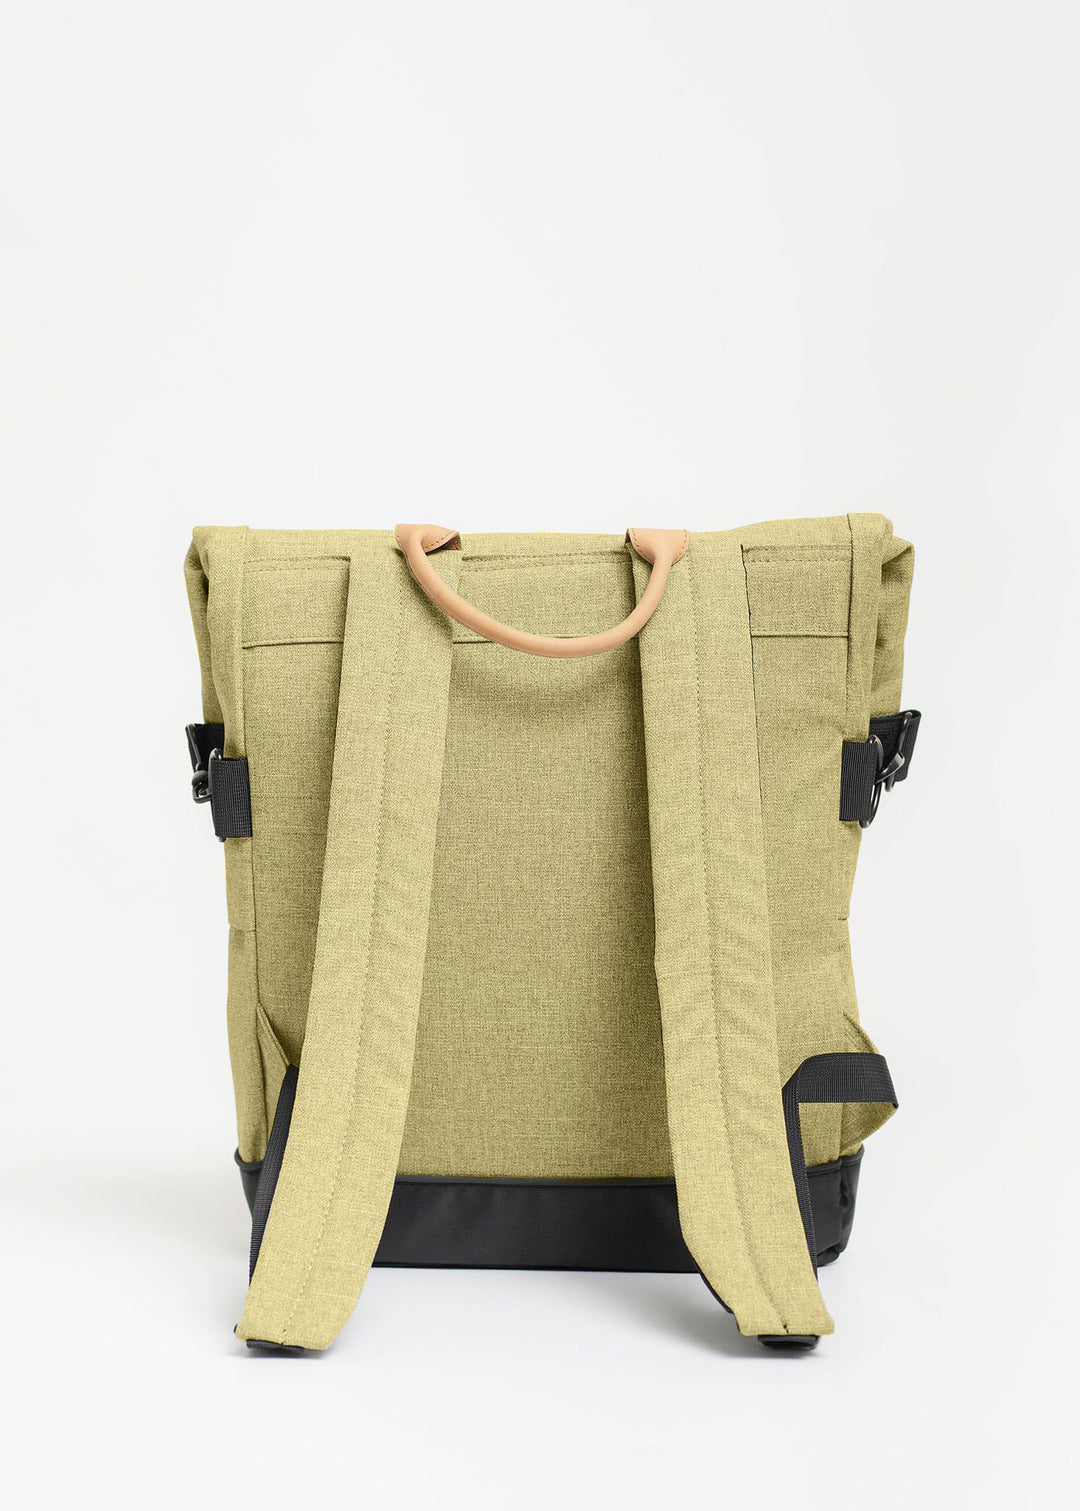 BRGN by Lunde & Gaundal Small Backpack Accessories 840 Lizard Green